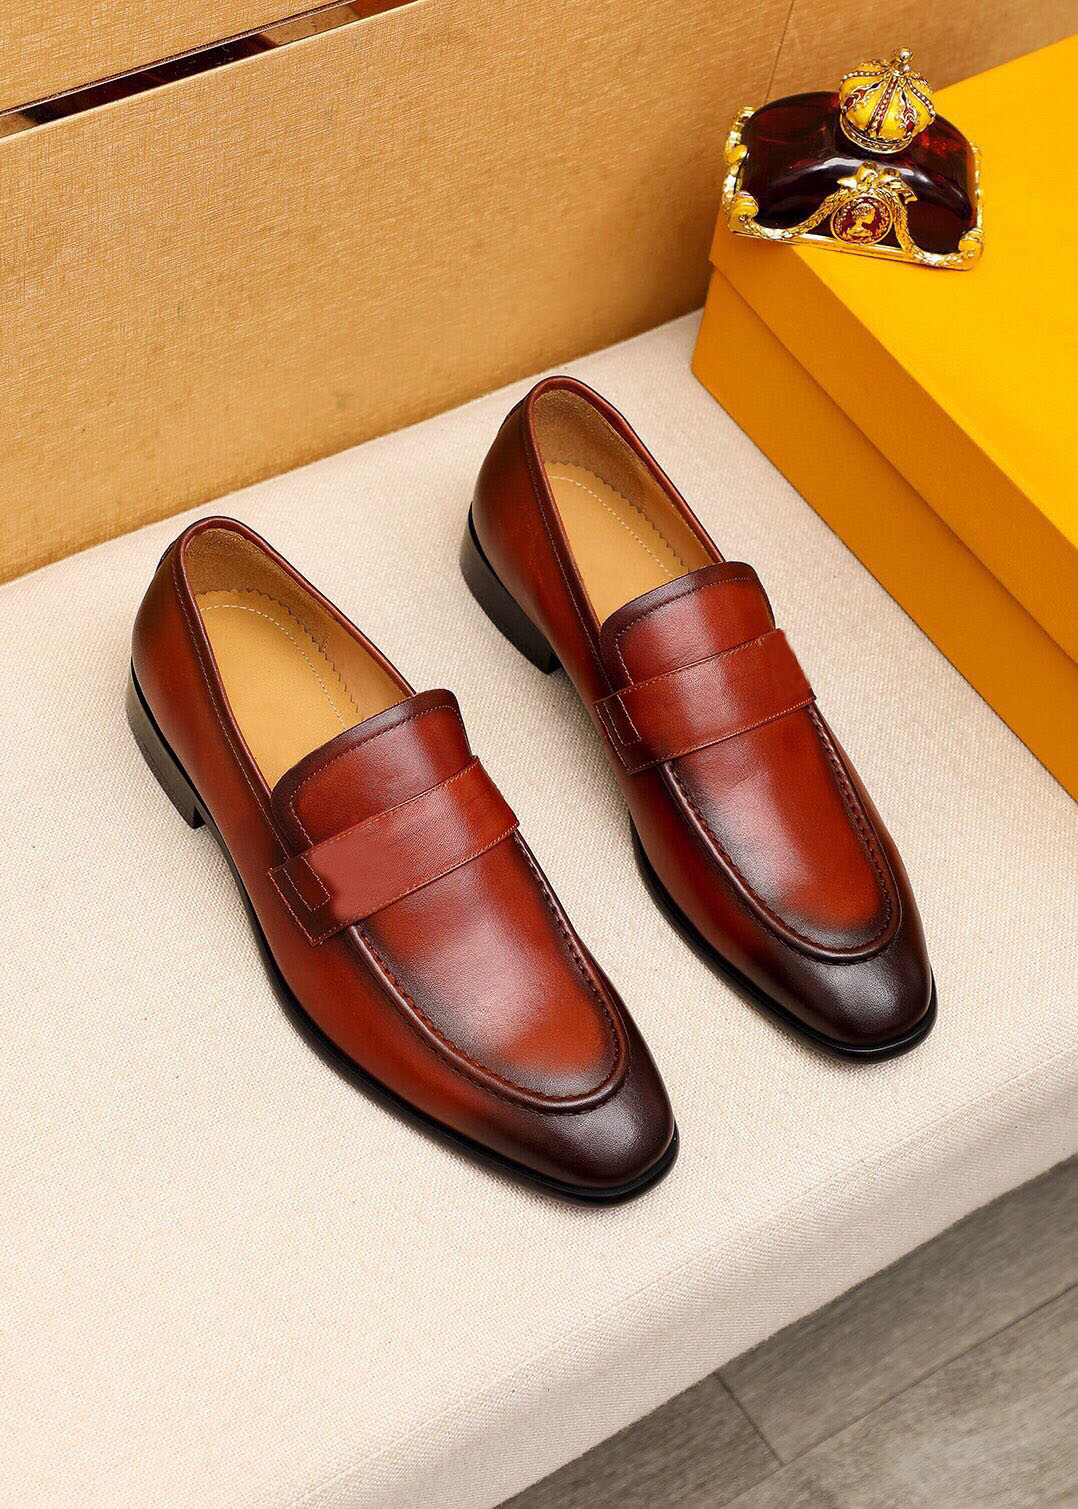 2023 Mens Business Party Wedding Dress Shoes Men Brand Designer Formal Genuine Leather Oxfords Male Outdoor Walking Loafers Size 38-45